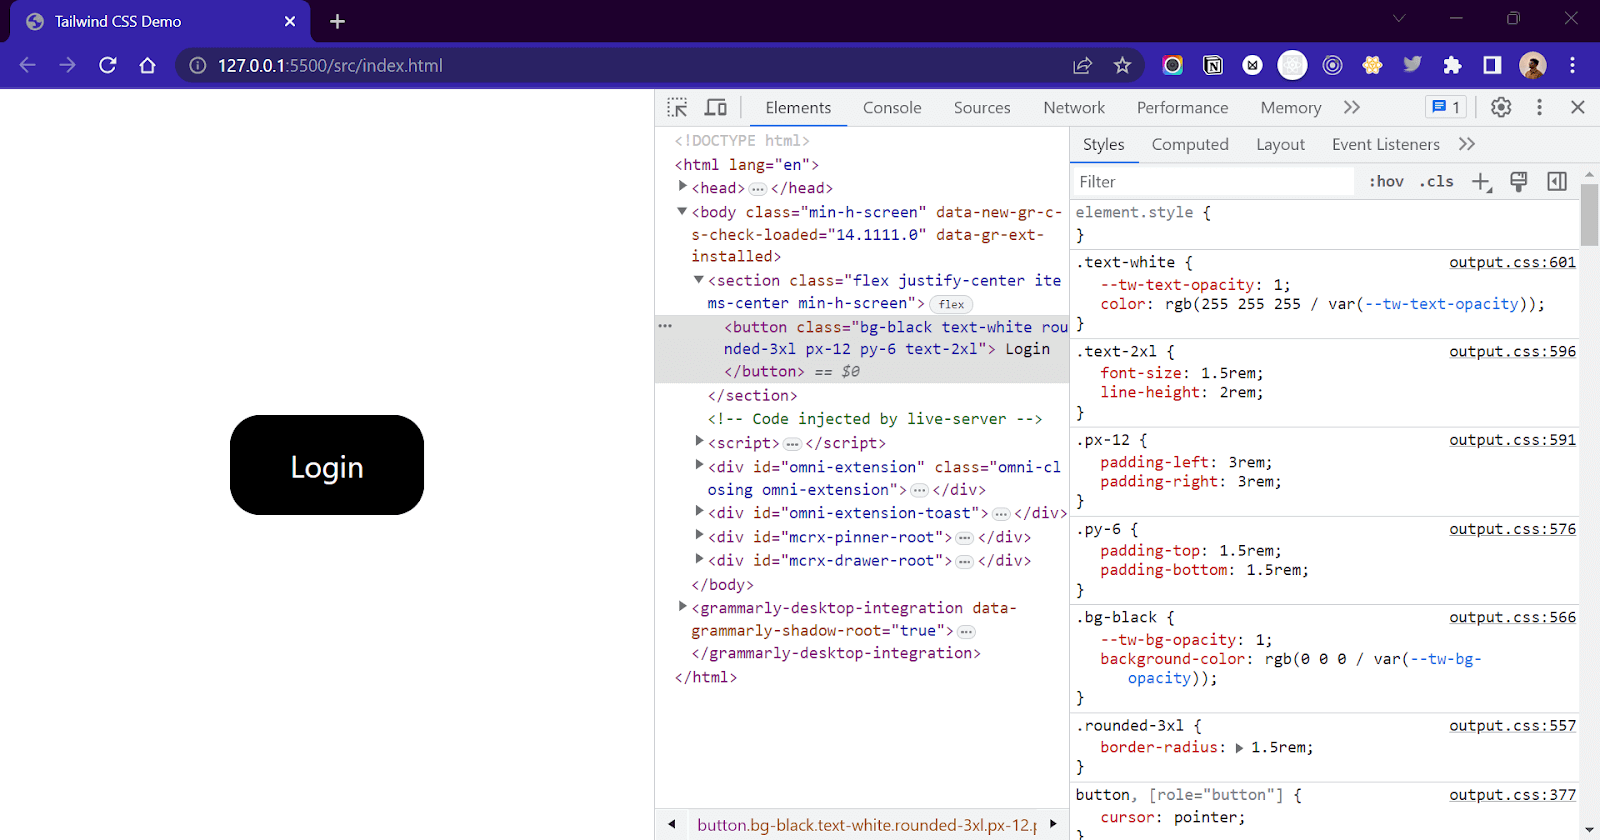 CSS properties were applied to our button element through the classes 